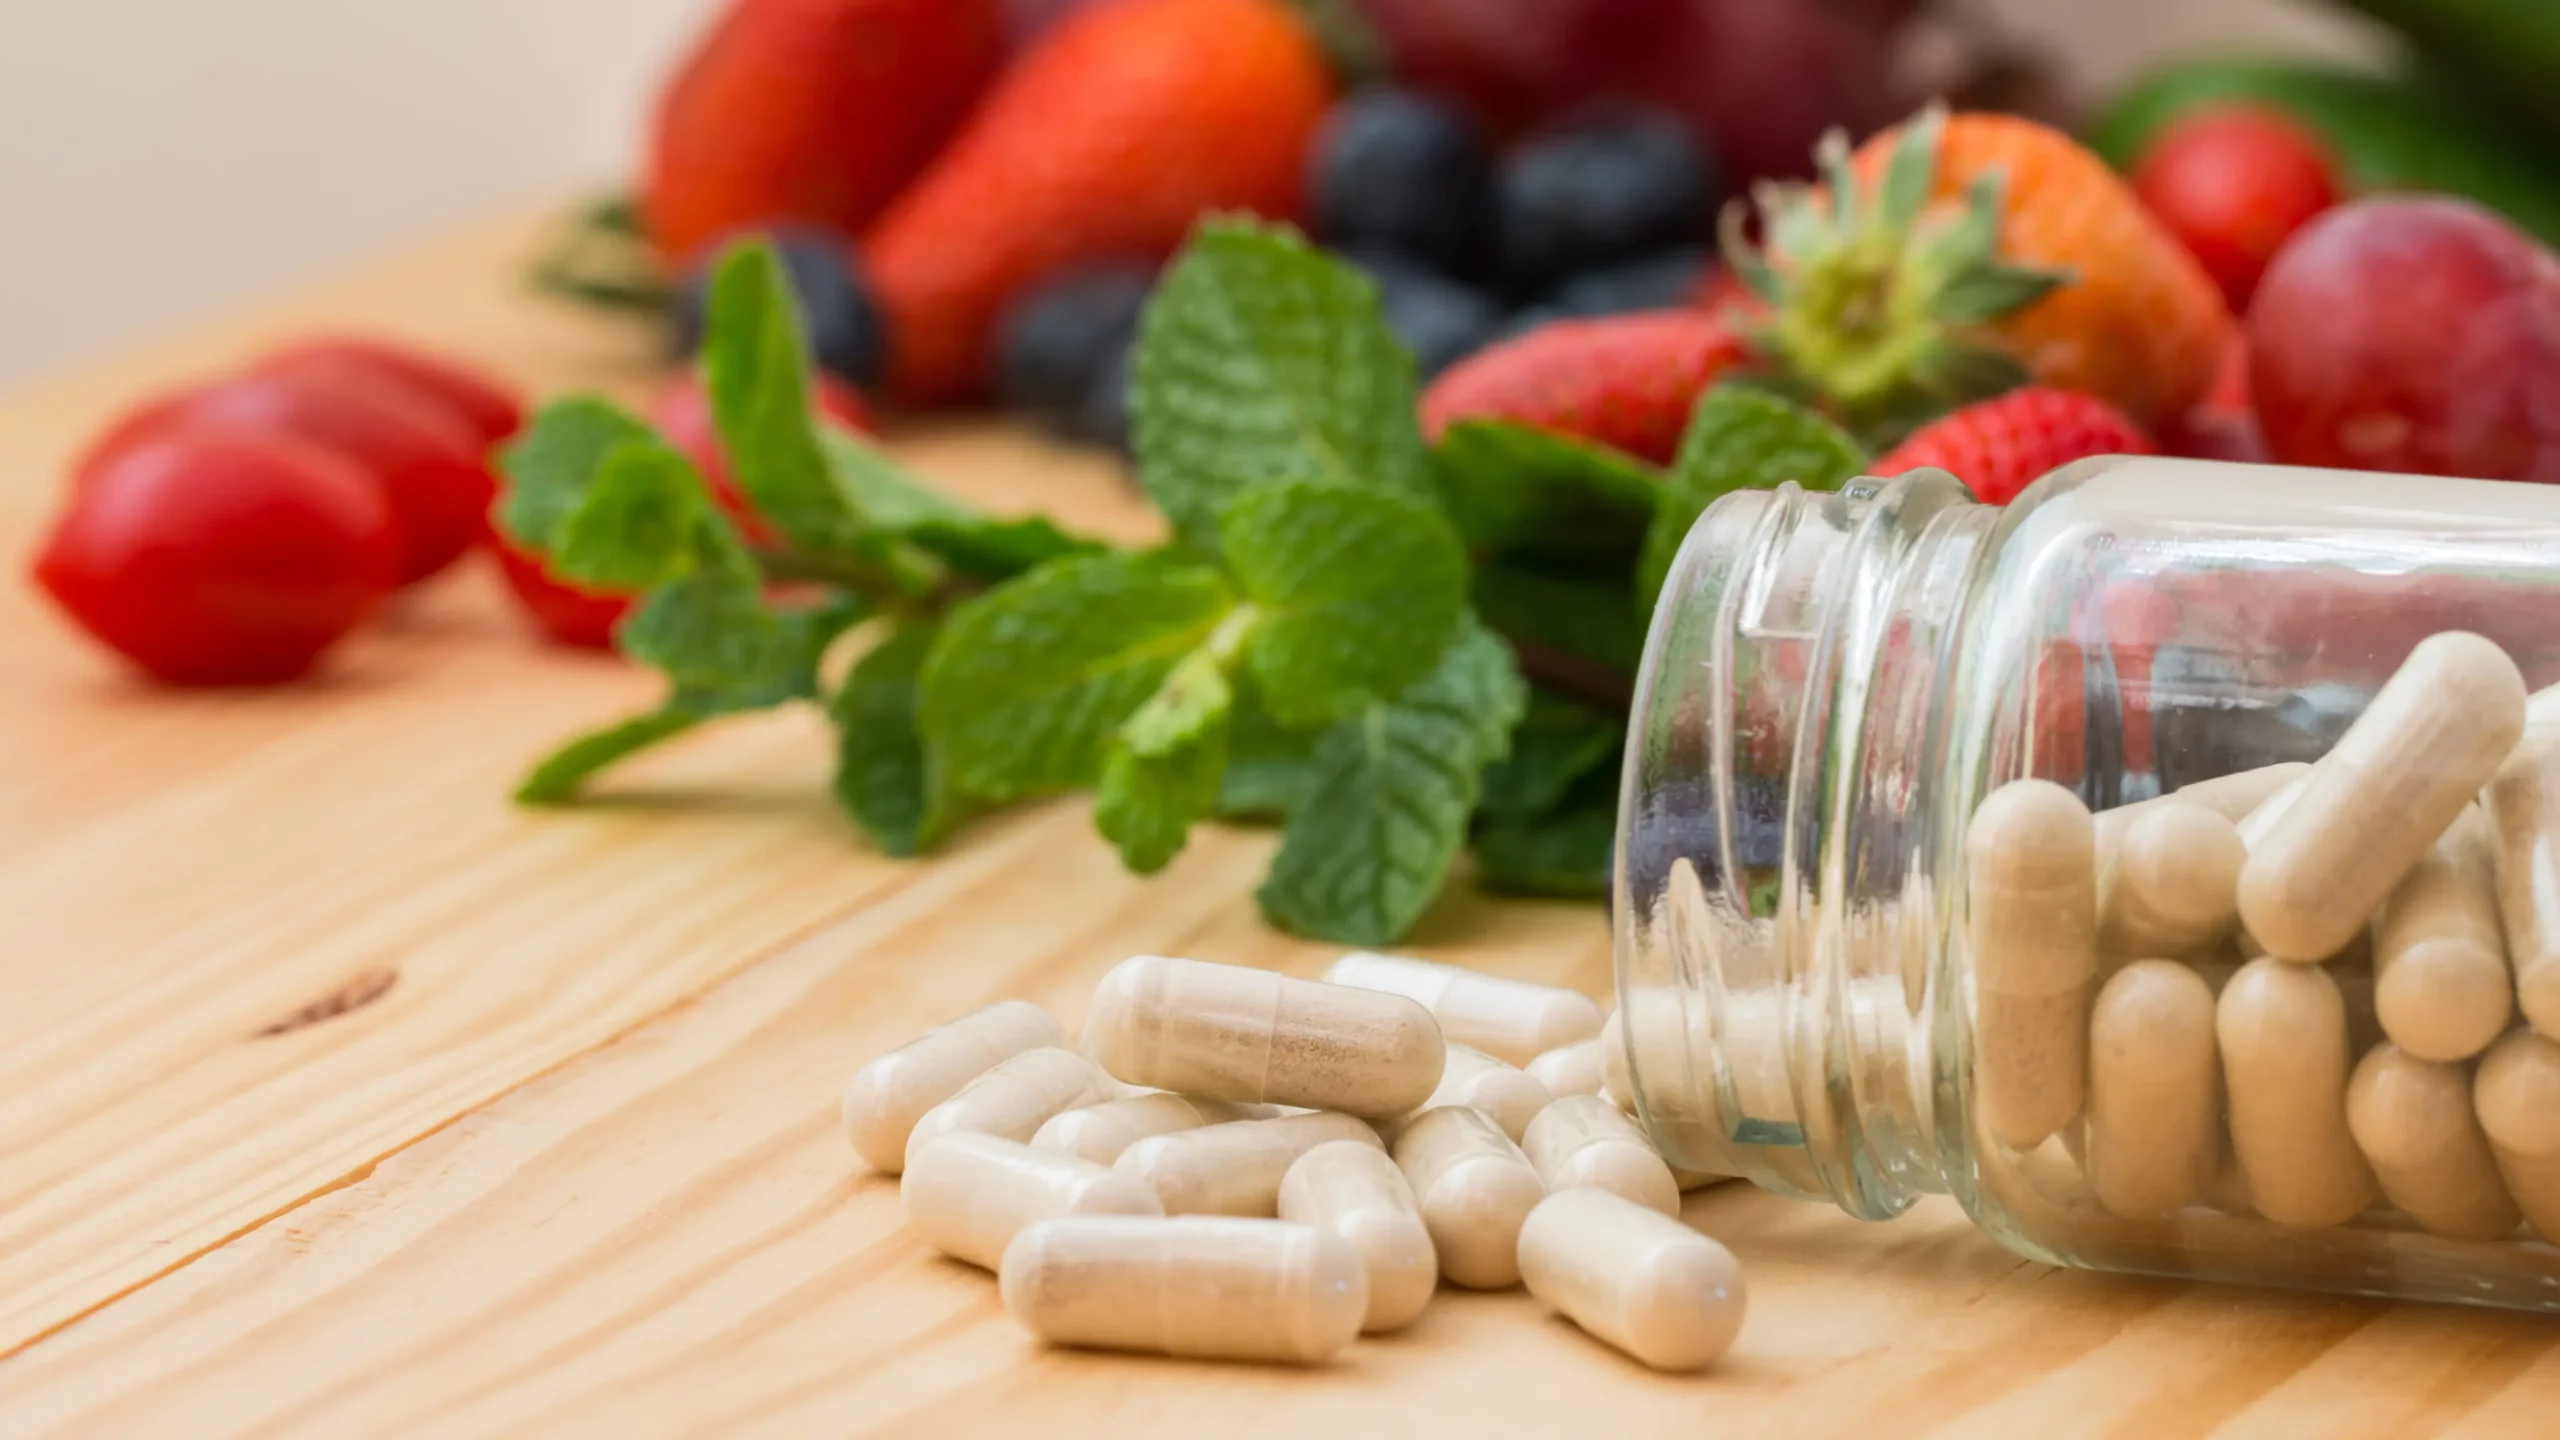 Vitamins and minerals may be customised for you at East Coast Compounding